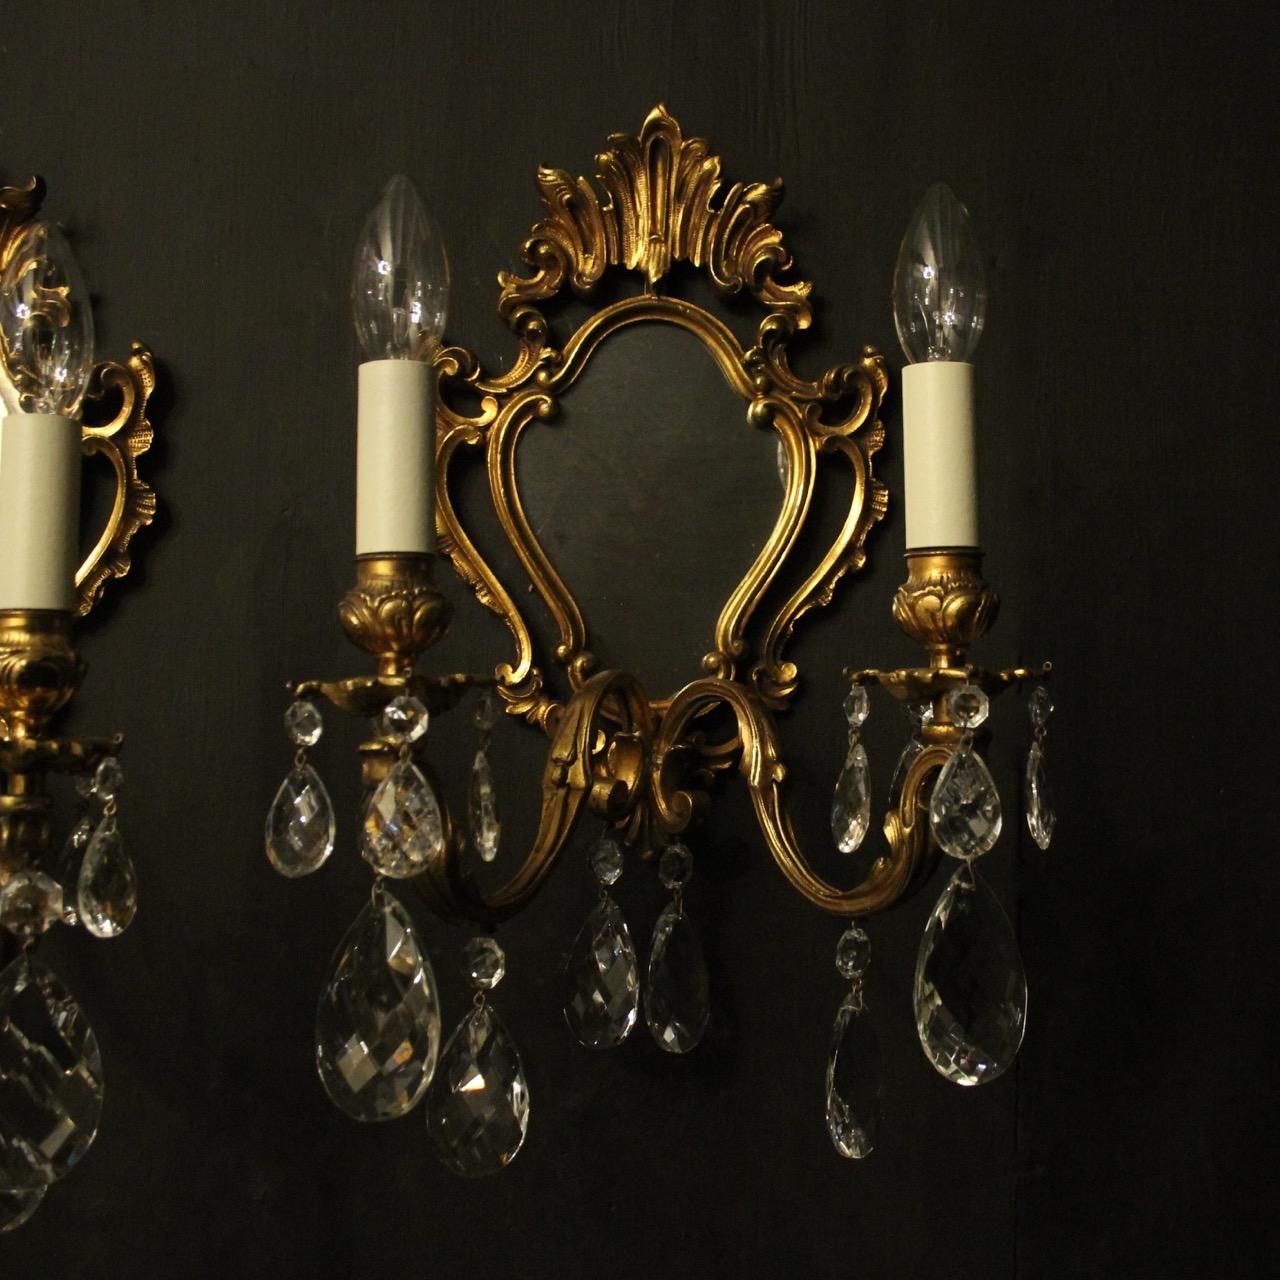 A French pair of gilded cast bronze twin arm antique girandoles, the ornate leaf scrolling arms with foliated bobeche drip pans and bulbous candle sconces, issuing from an ornately cast cartouche leaf mirrored backplate and decorated with faceted